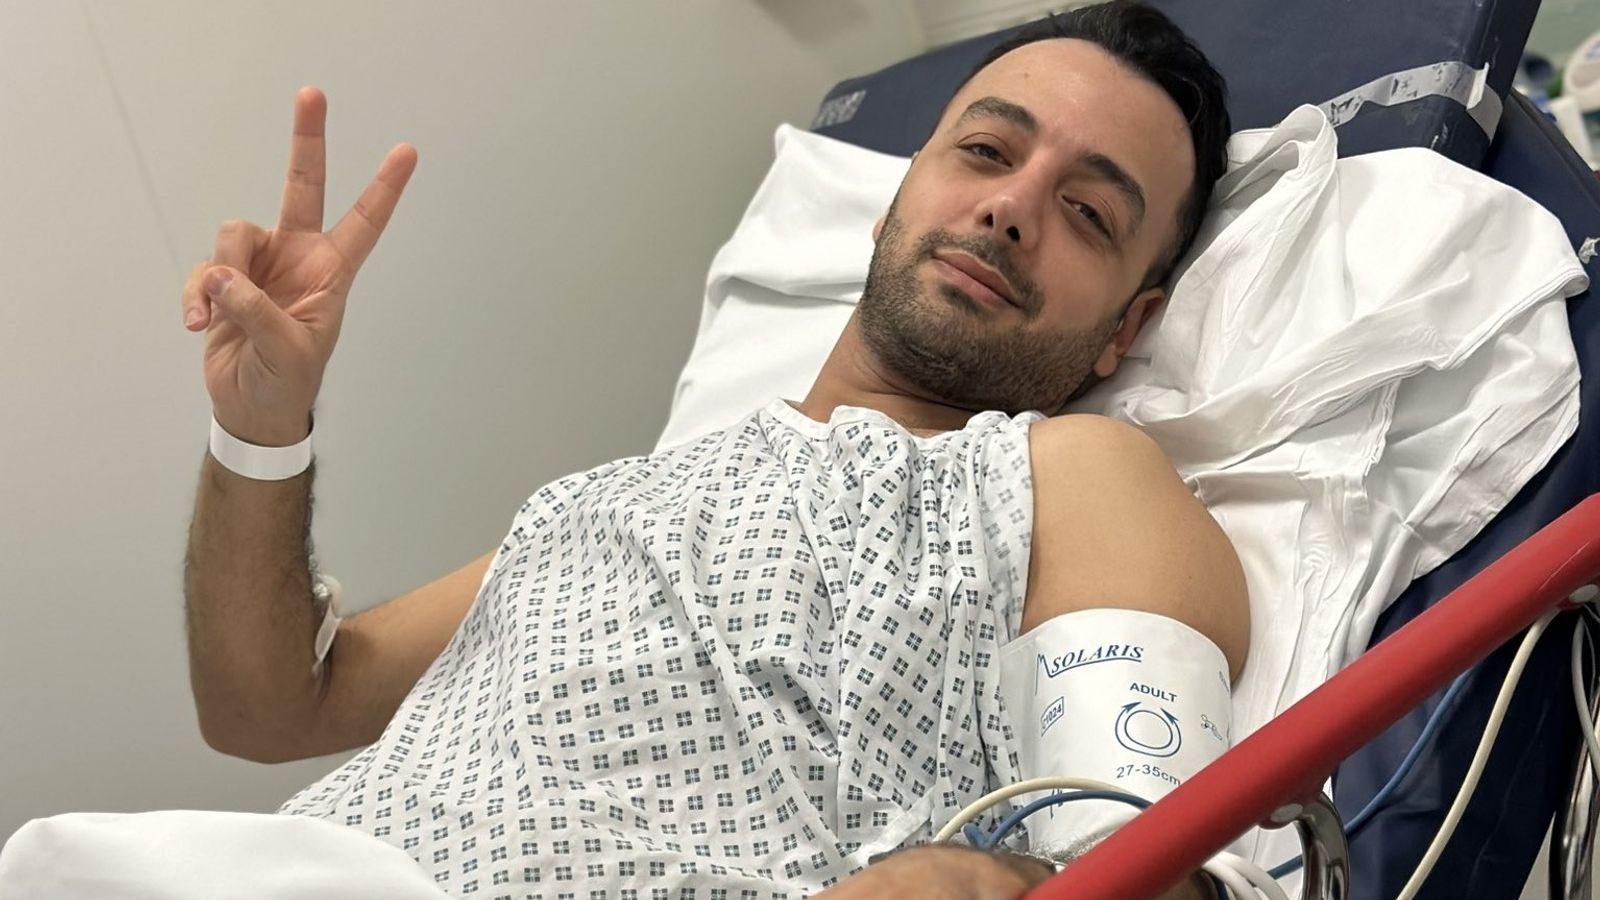 Pouria Zeraati: Iranian journalist shares defiant photo of himself from hospital bed after being stabbed in London | UK News